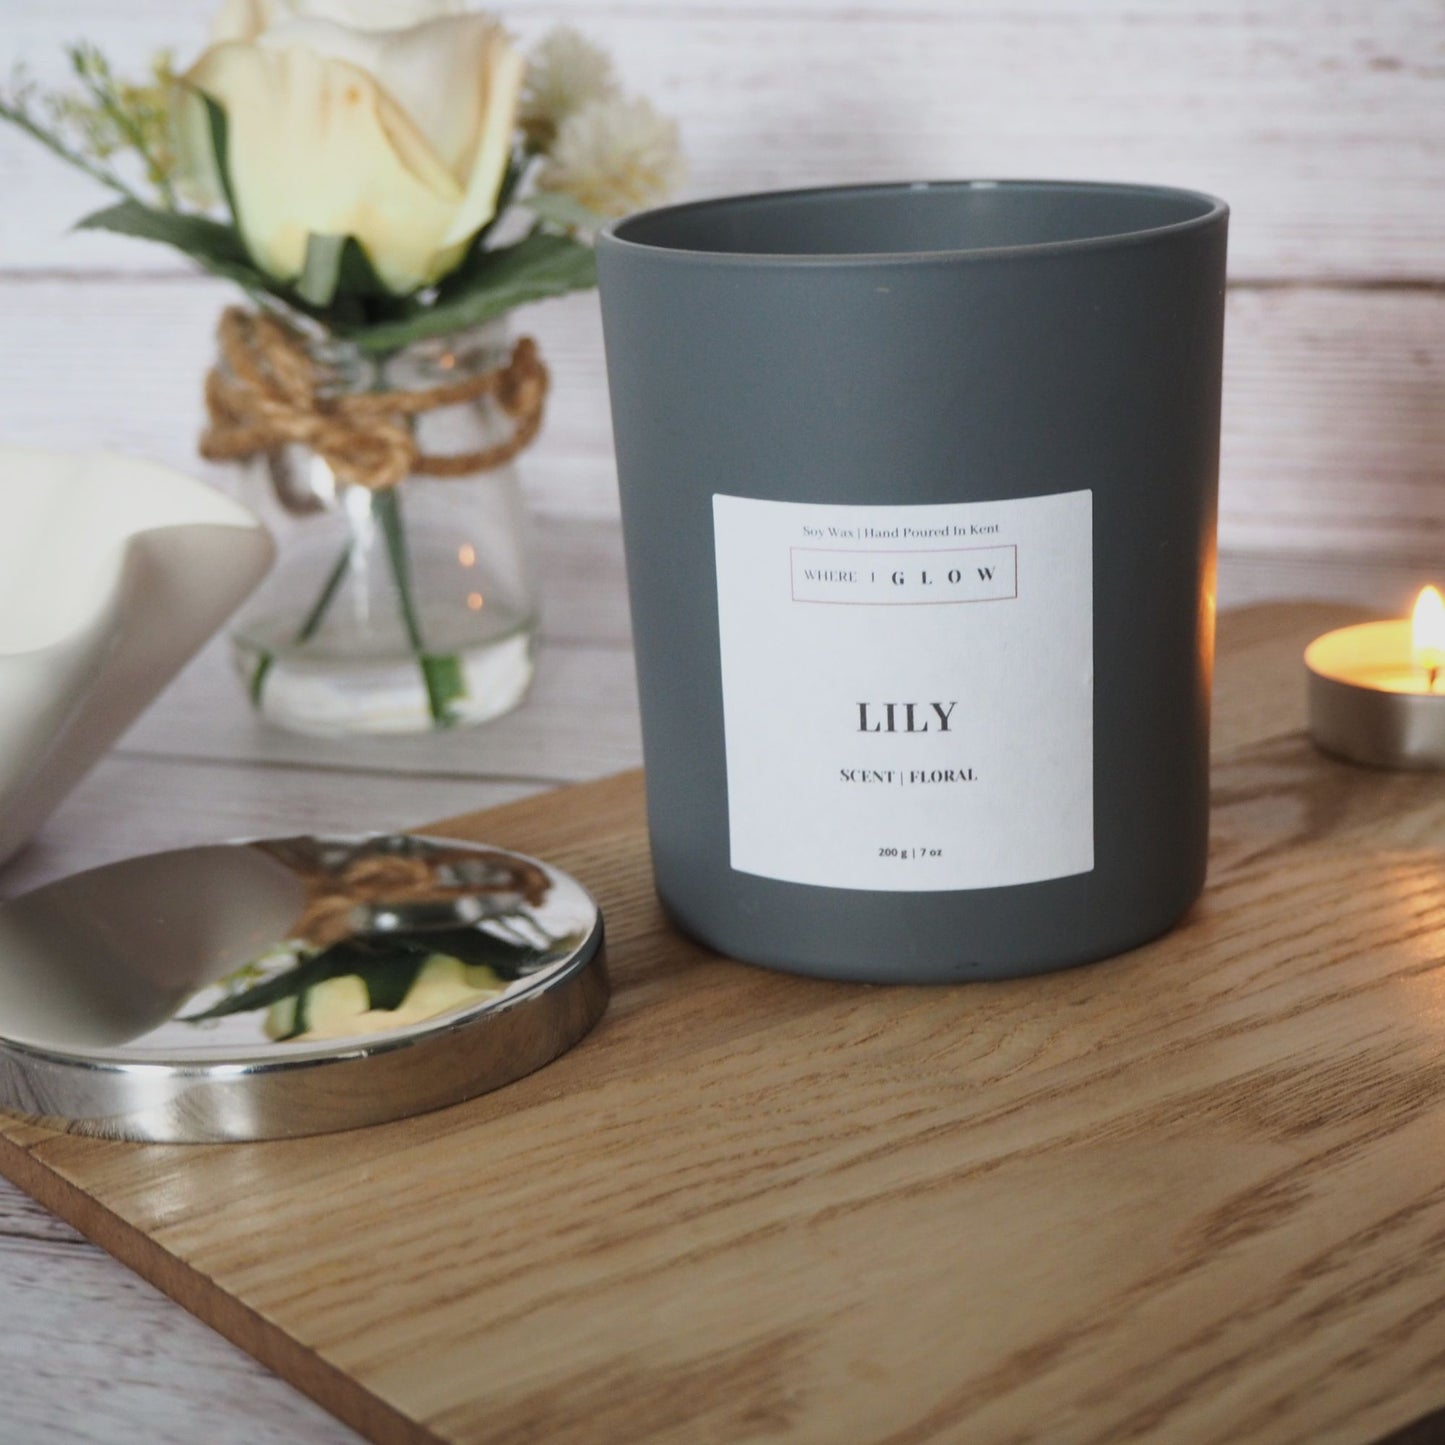 Lily Spring Soy Candle 7 oz by Where I Glow